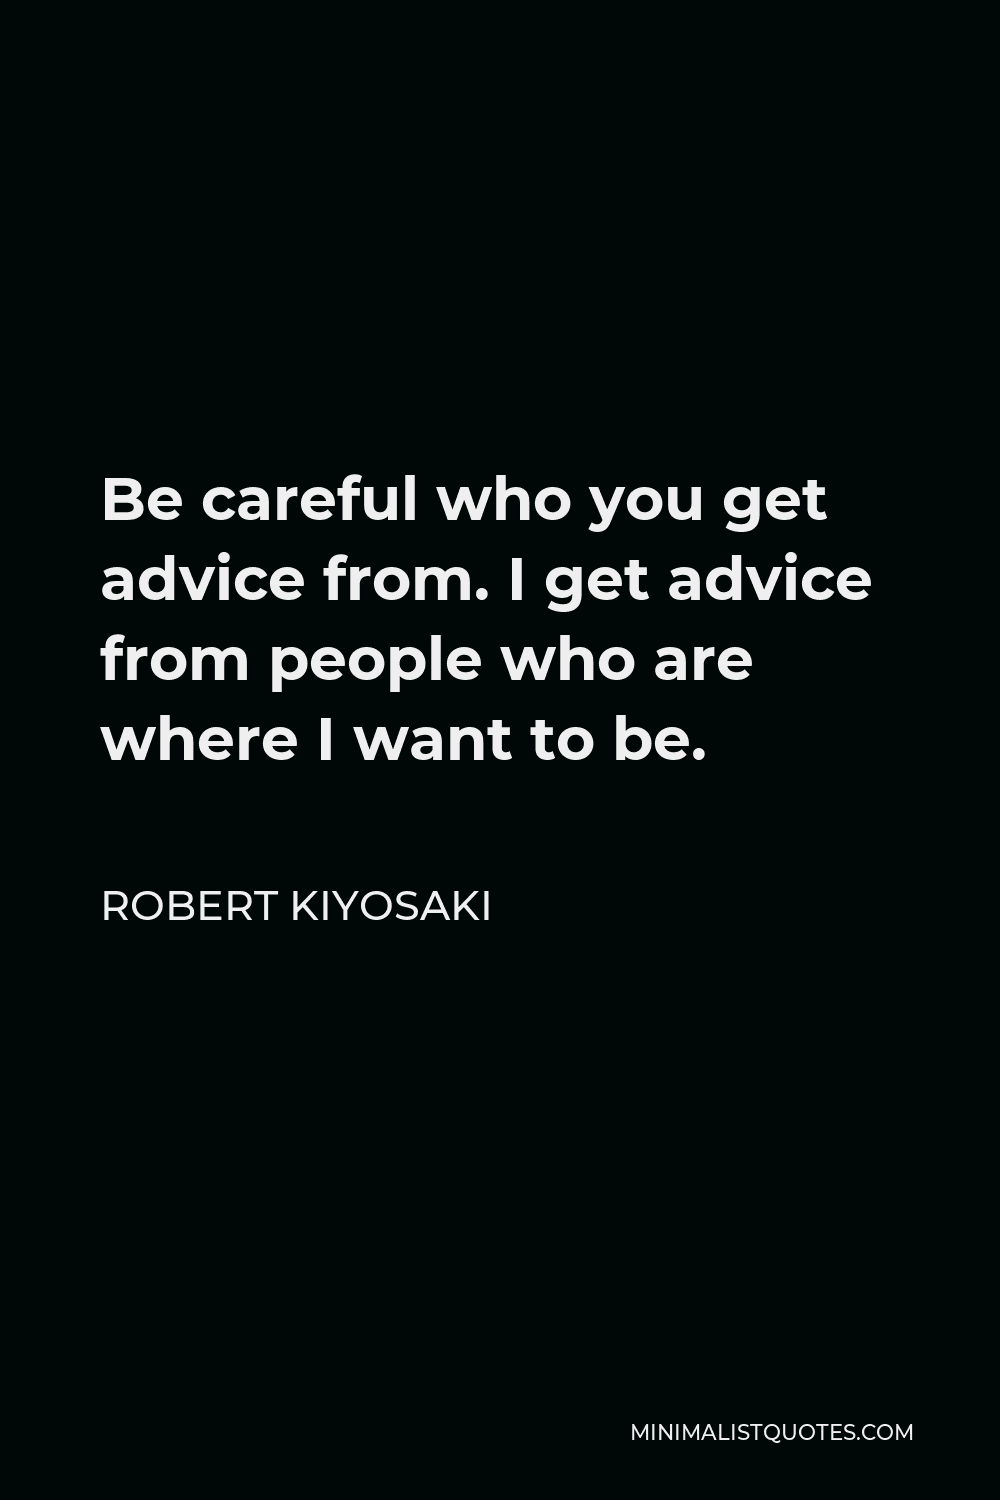 Robert Kiyosaki Quote - Be careful who you get advice from. I get advice from people who are where I want to be.